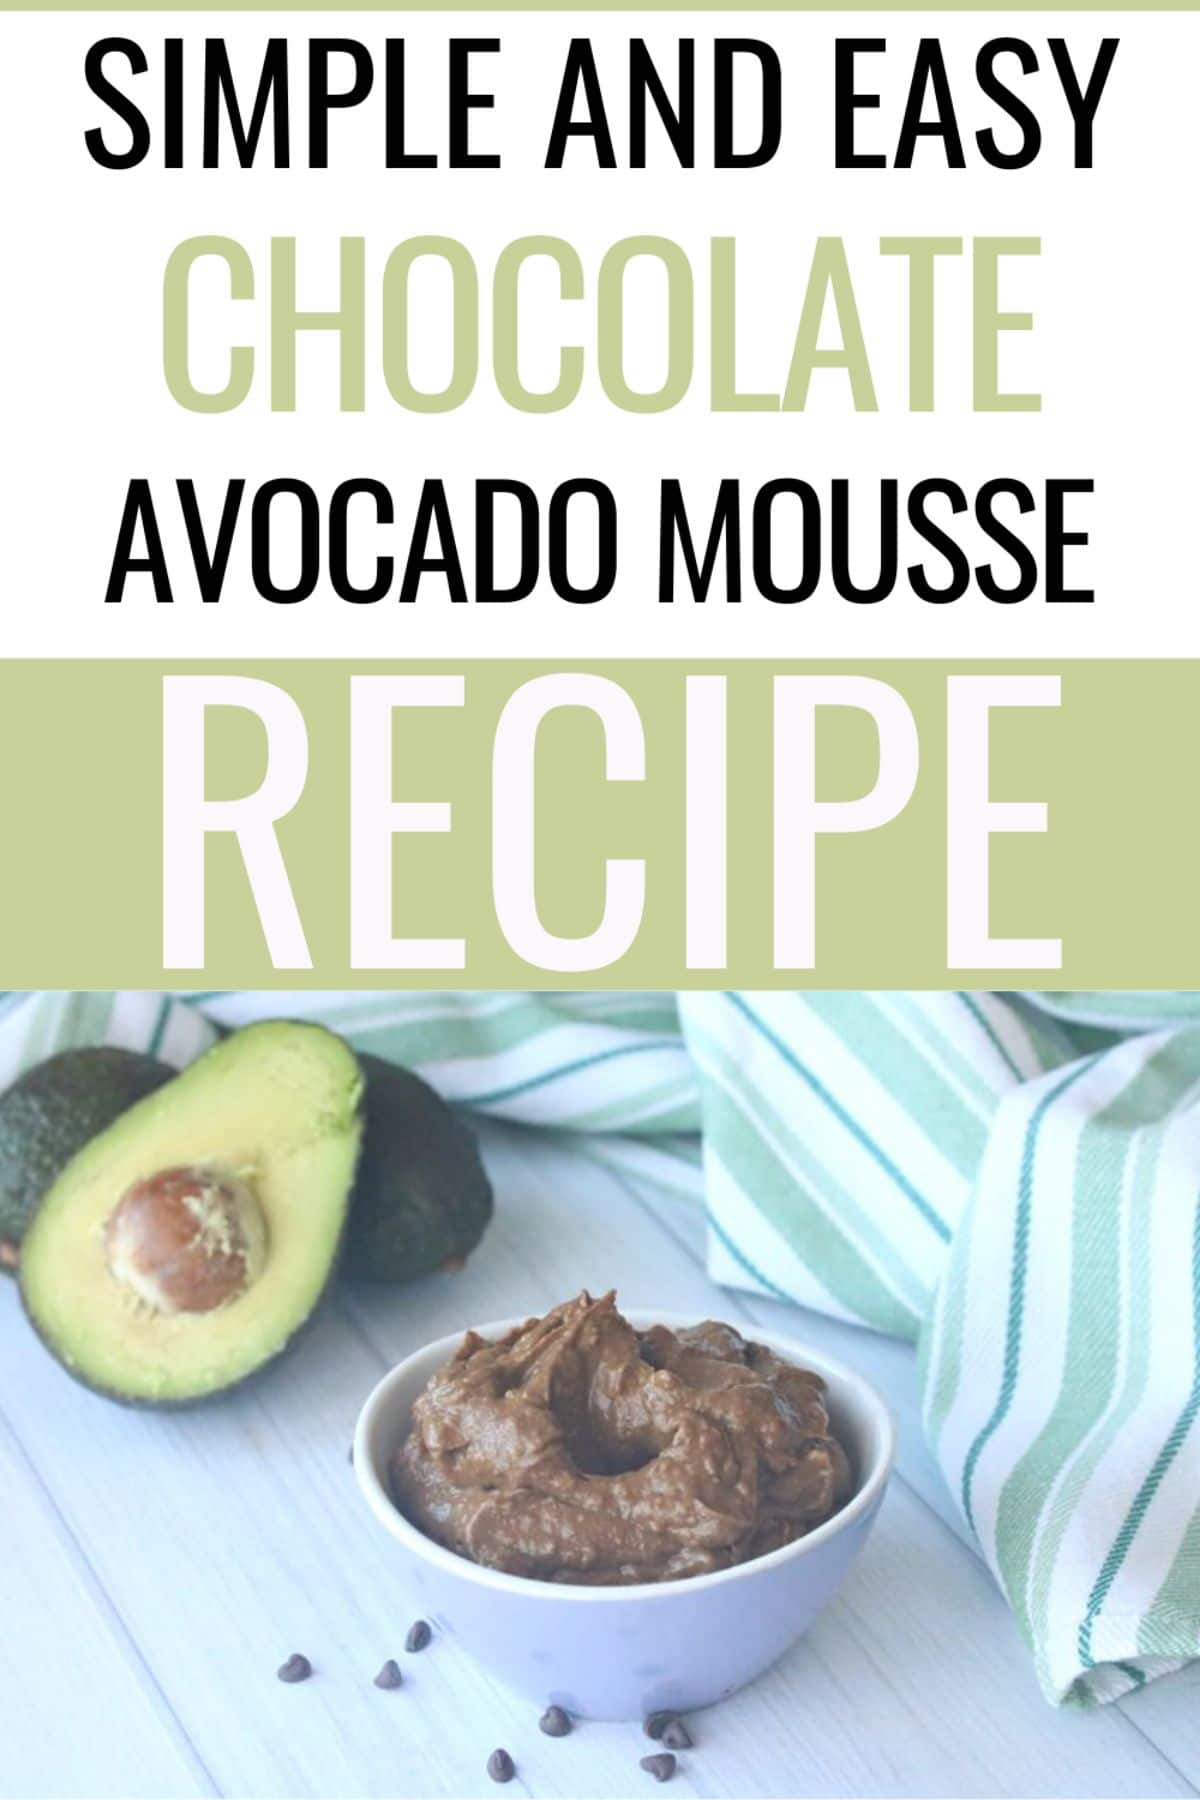 Chocolate Avocado Mousse in a white serving bowl and a text at the upper half of the image saying "Simple and Easy Chocolate Avocado Mousse Recipe"